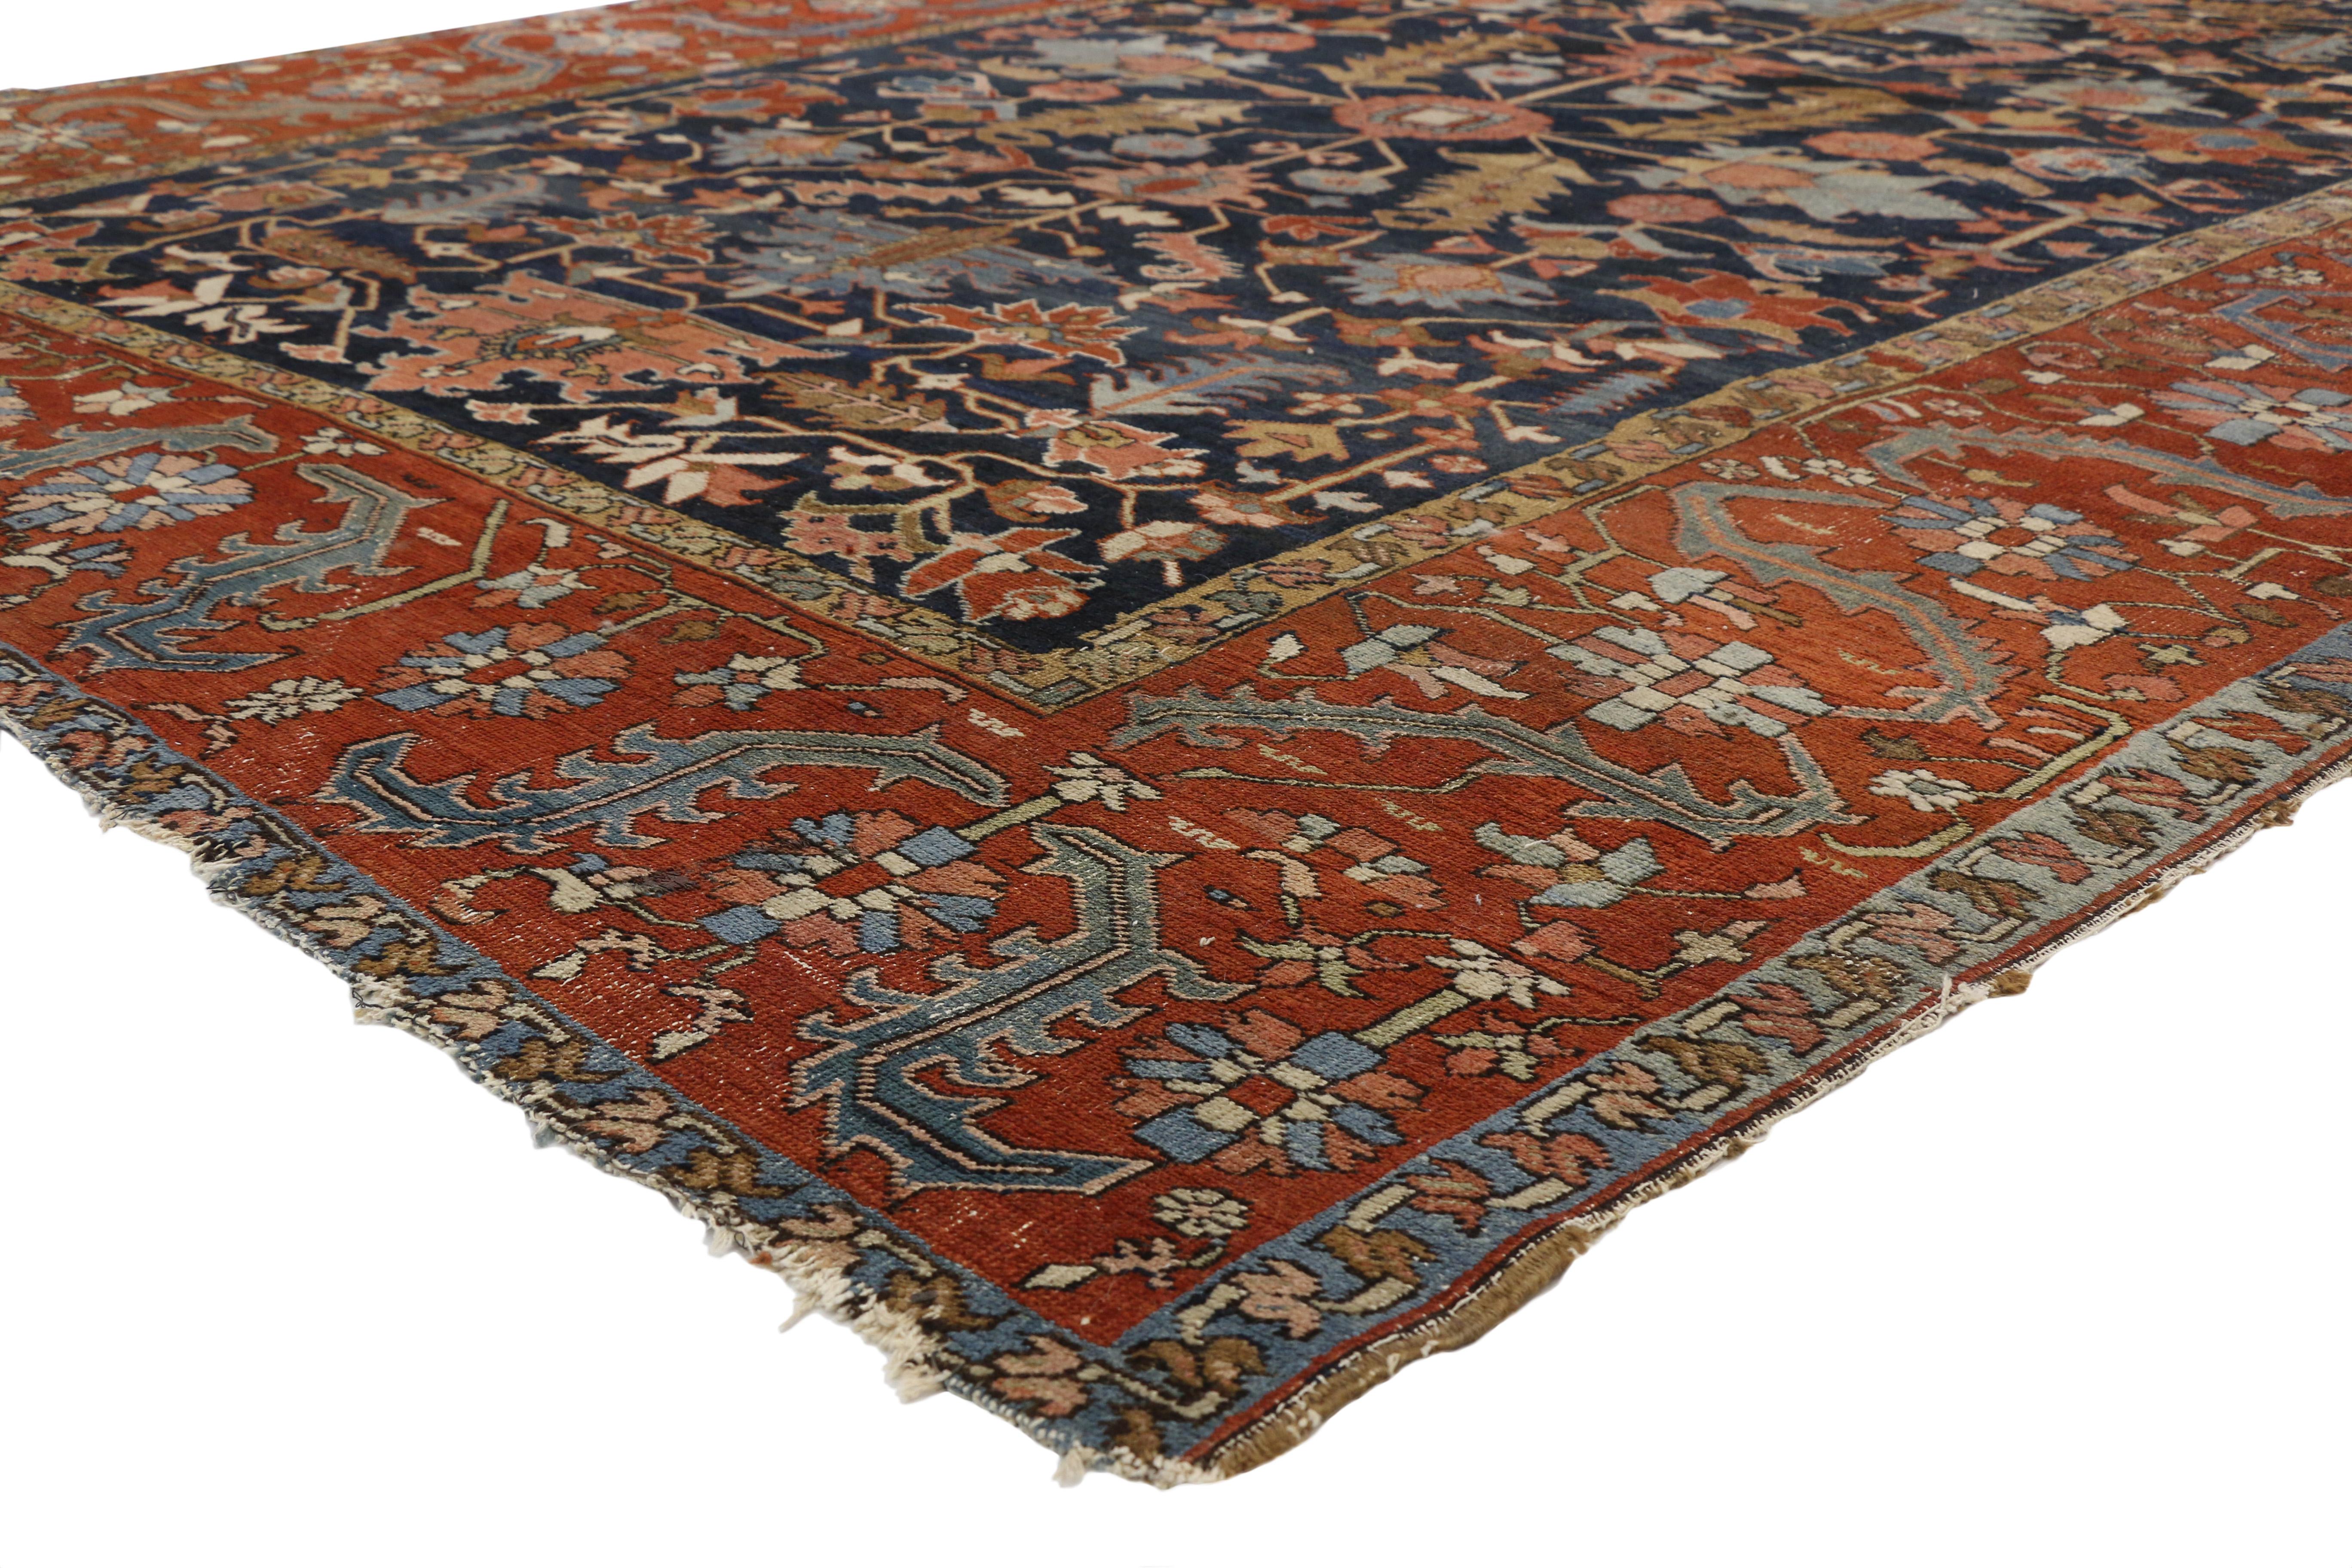 77301 distressed Antique Persian All-Over Serapi rug with Rustic Downton Abbey style. With time-softened color palette and rectilinear design, this hand knotted wool distressed Persian Serapi rug beautifully showcases a Downton Abbey style. A rare